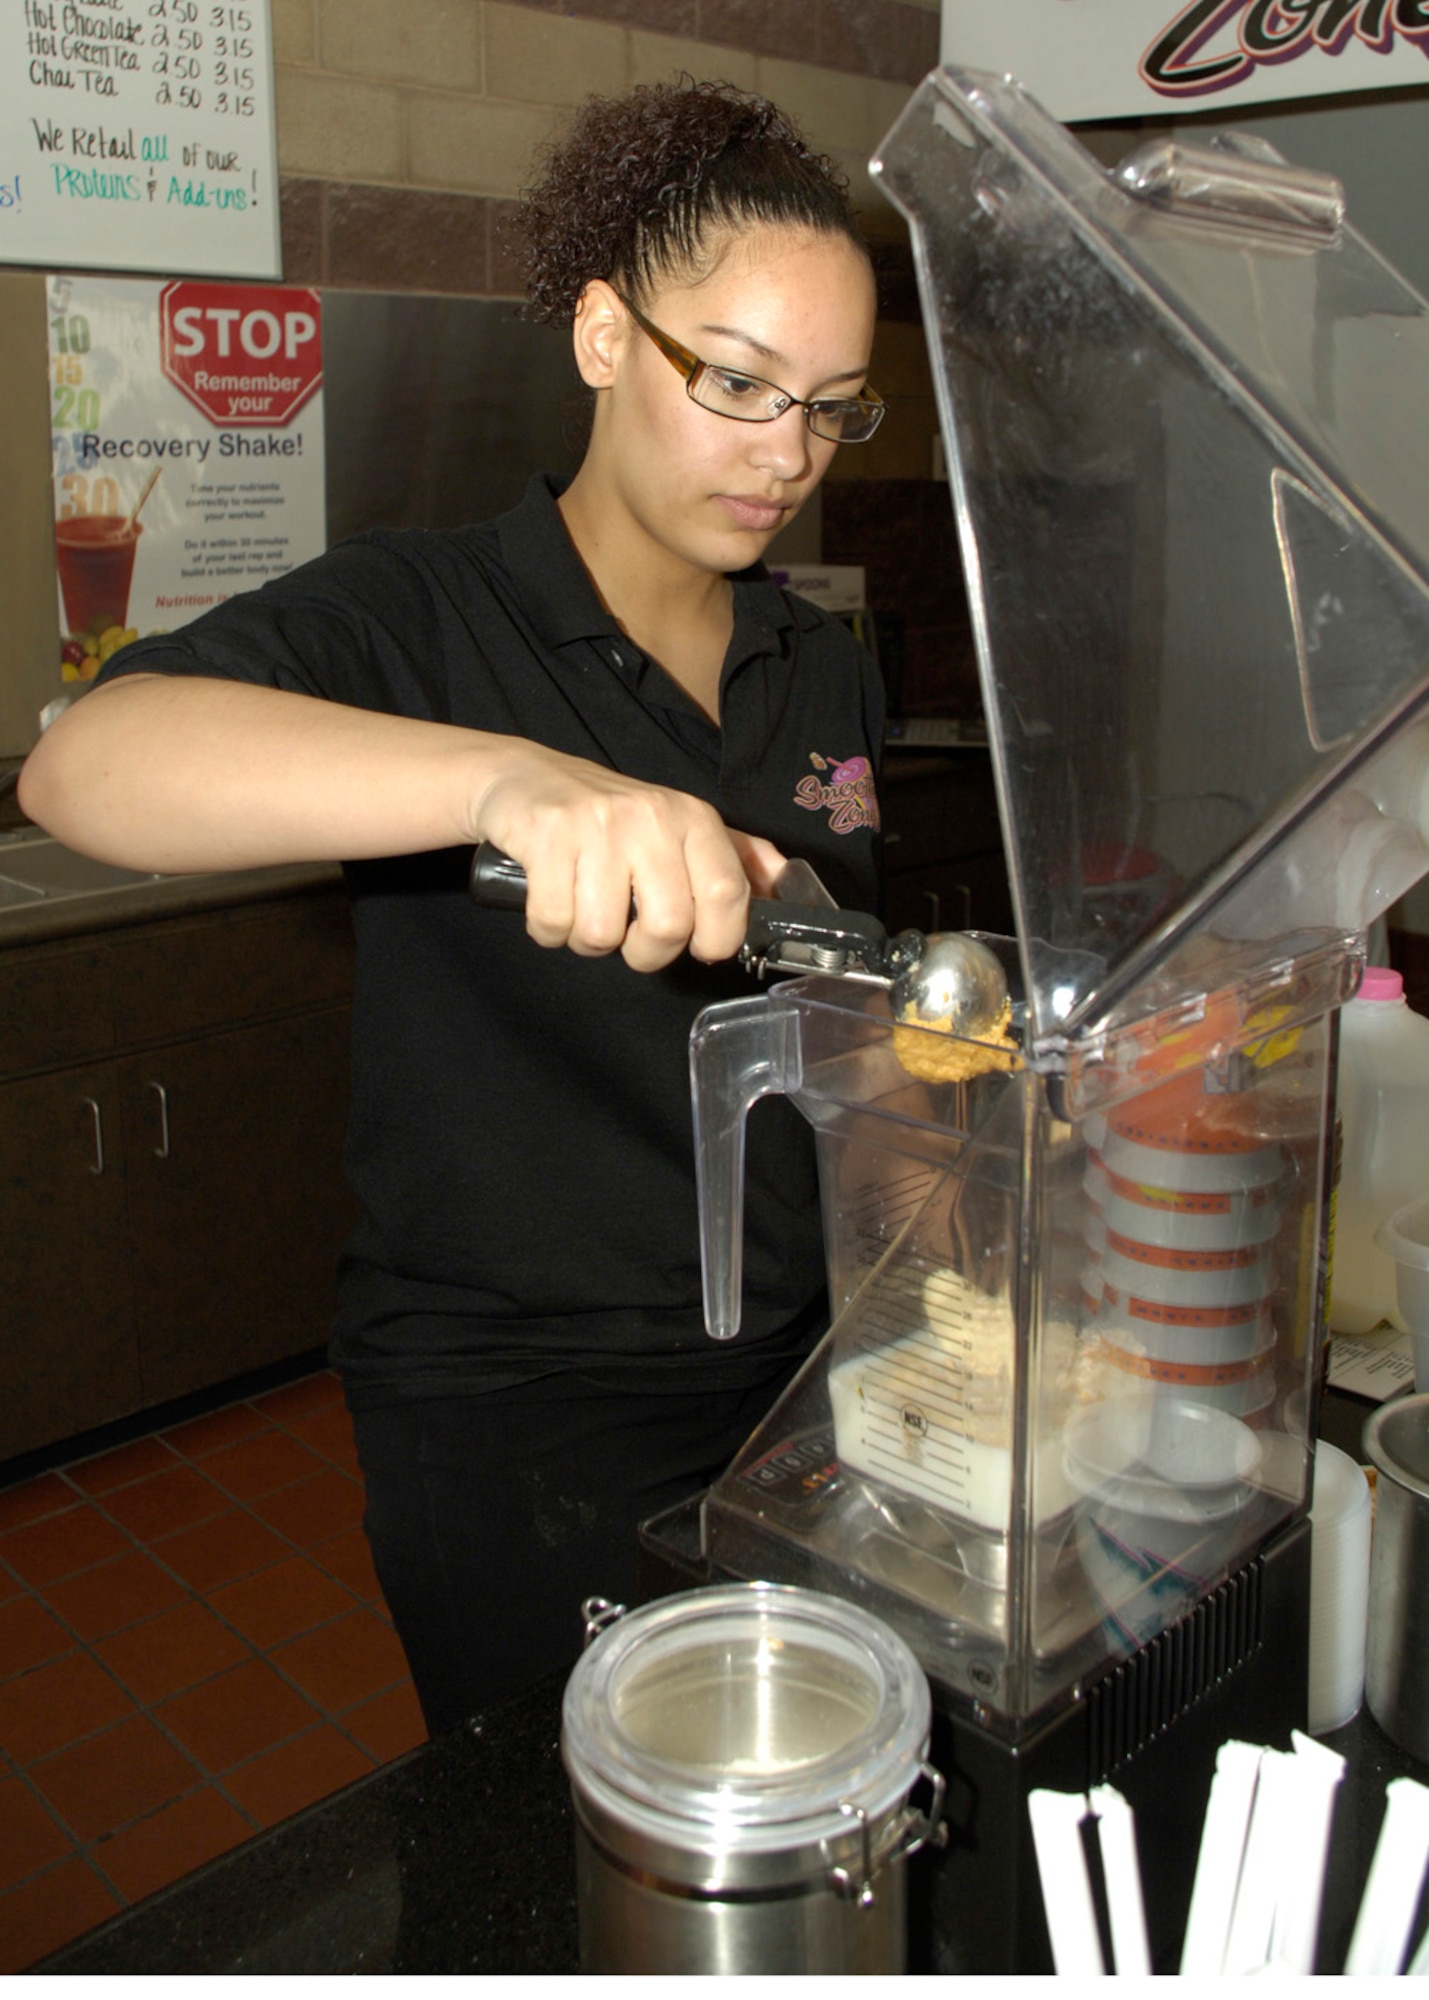 Ms. Chante Rue, Smoothie Zone employee, makes a smoothie March 19, 2008, at Holloman Air Force Base, N.M. The Smoothie Zone recently opened March 14. (U.S. Air Force photo/Airman 1st Class Michael J. Means )